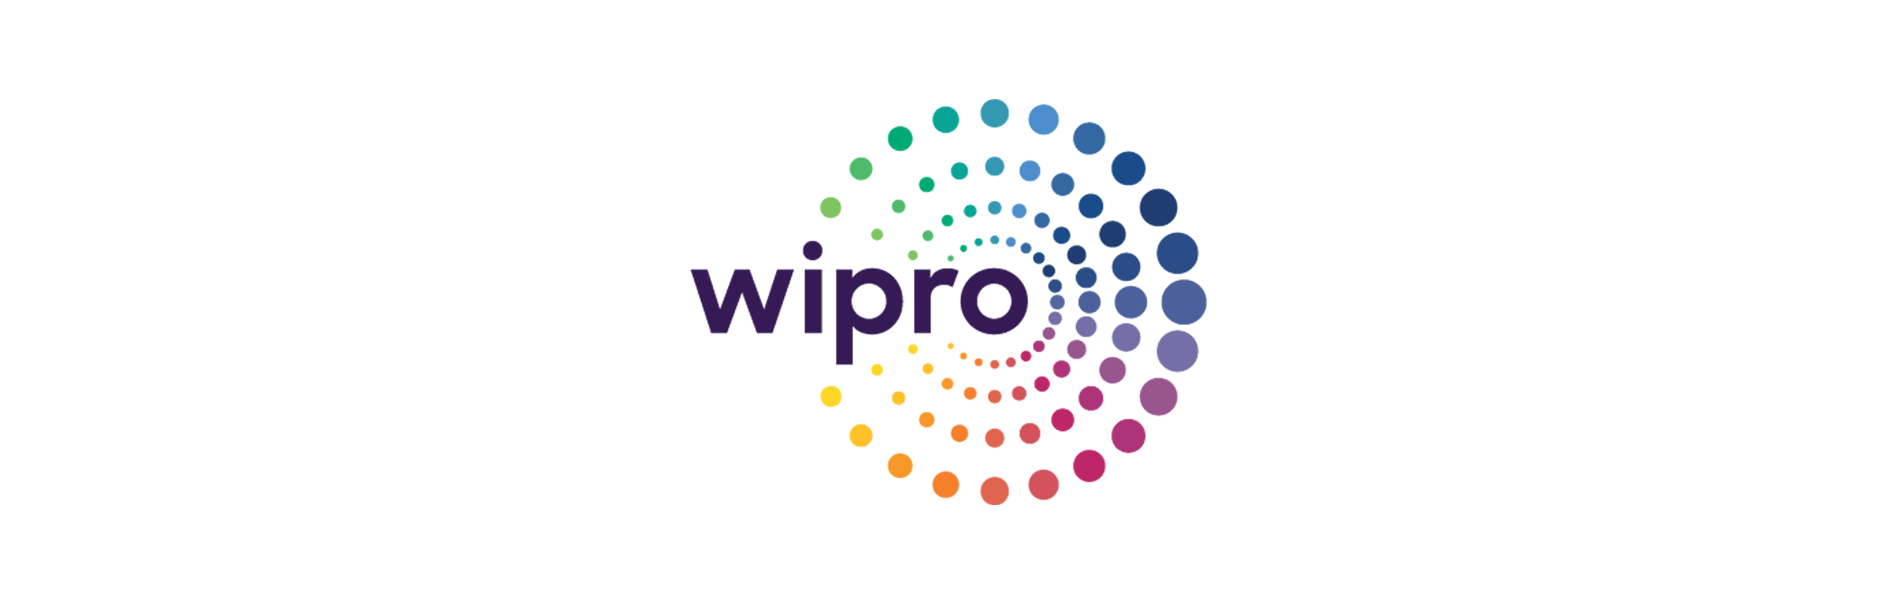 Cost Management with Automated Mining Operations - Wipro